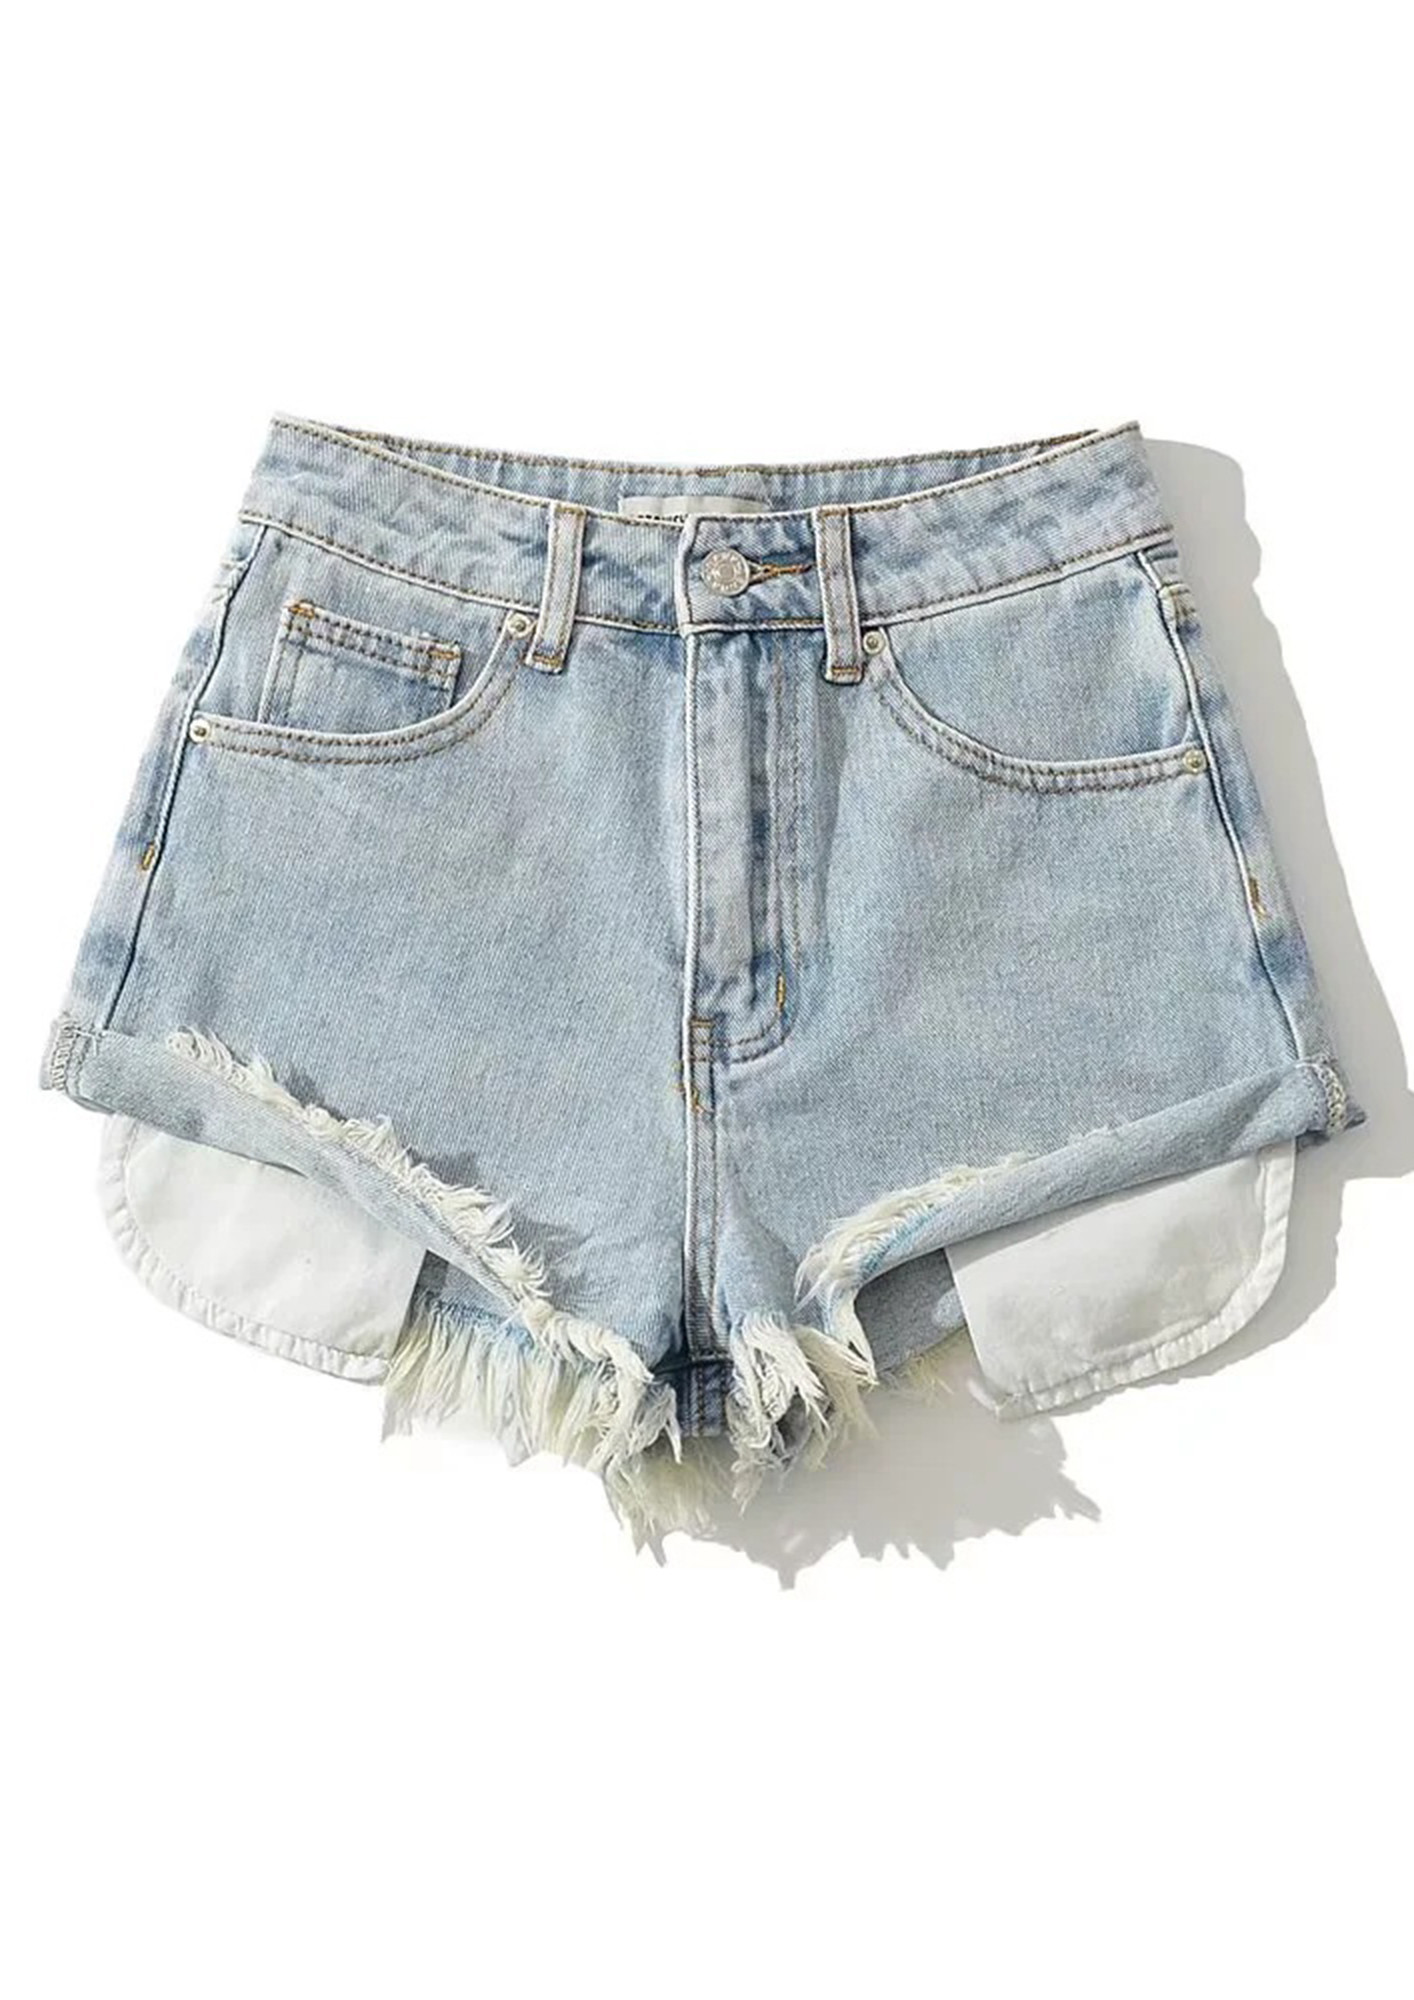 High Waisted 90's Light Wash Distressed Jean Shorts | Express